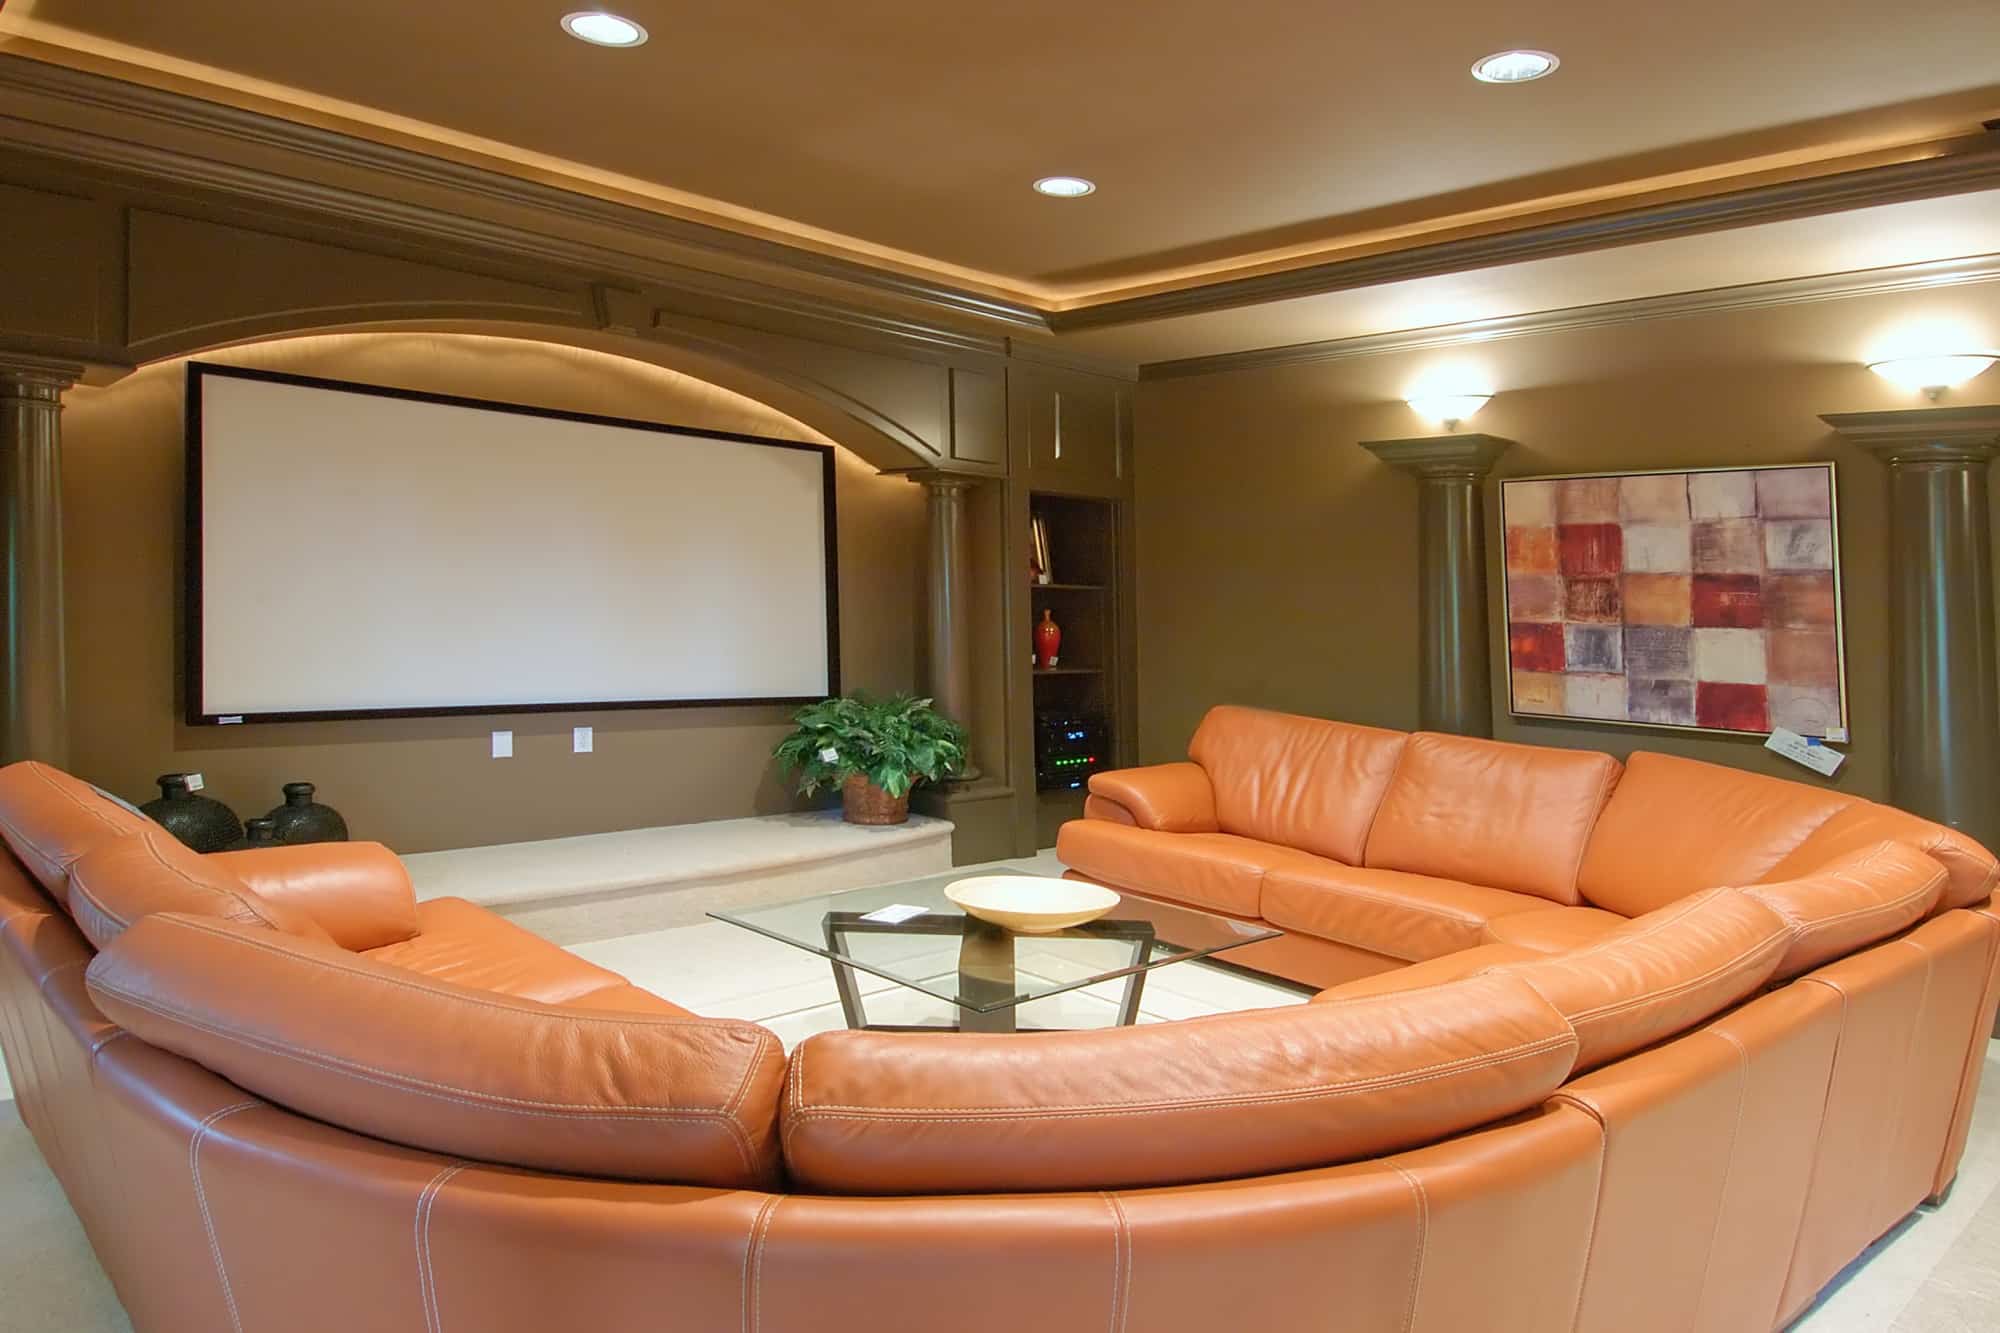 9 Epic Home Theater Seating Ideas